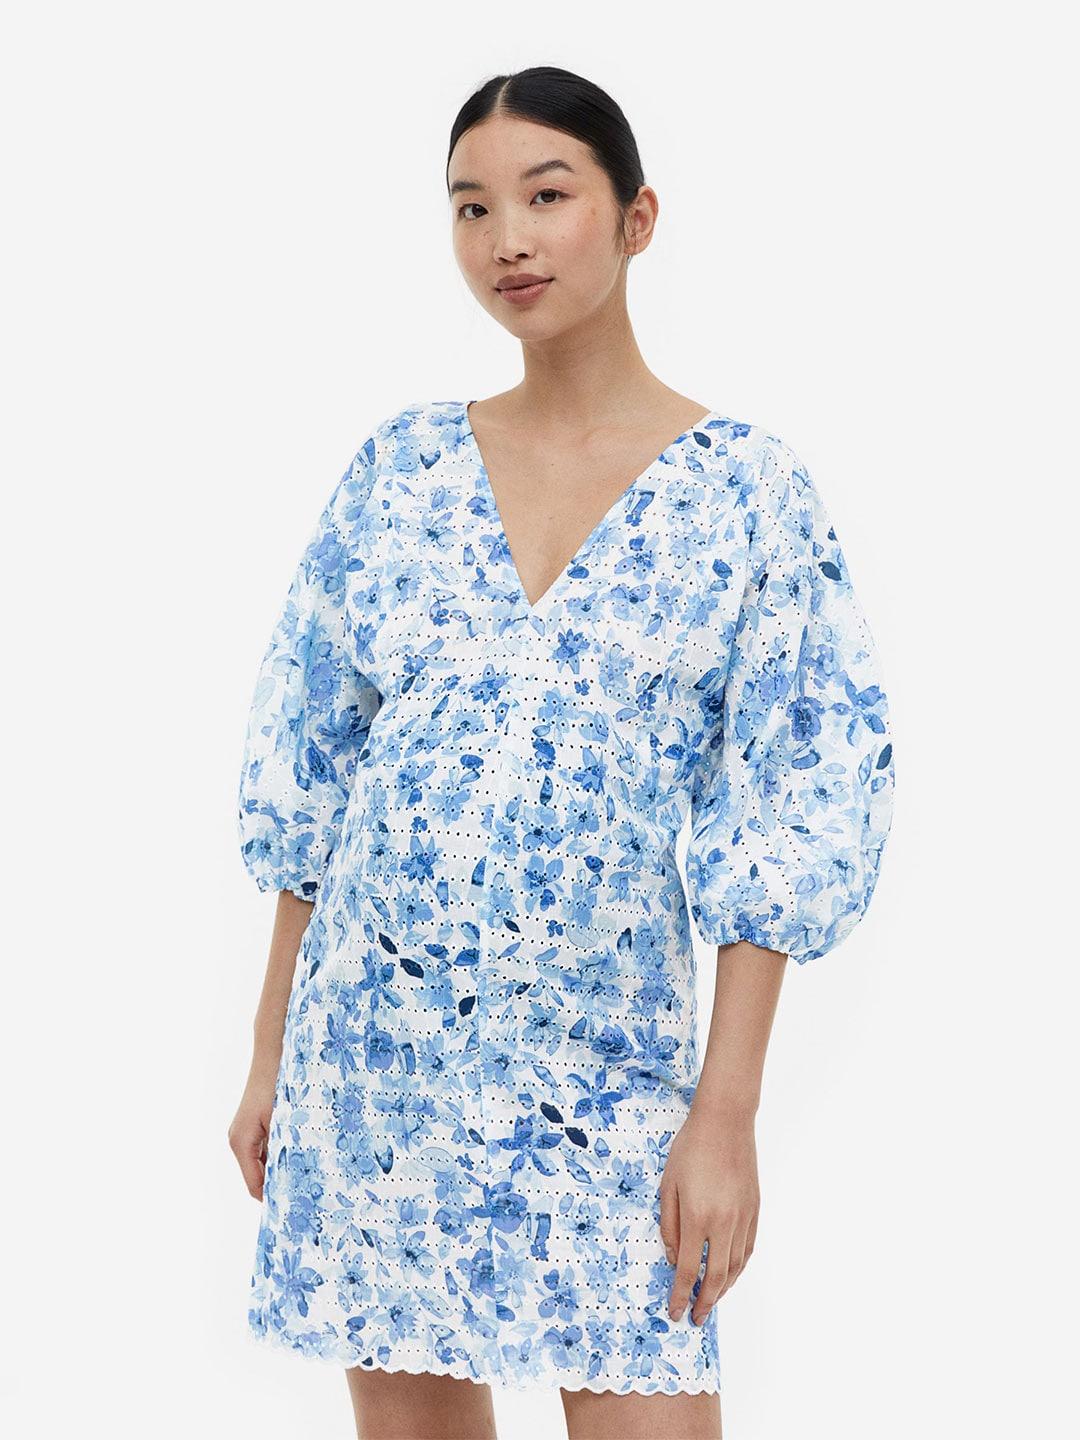 h&m mama broderie anglaise dress